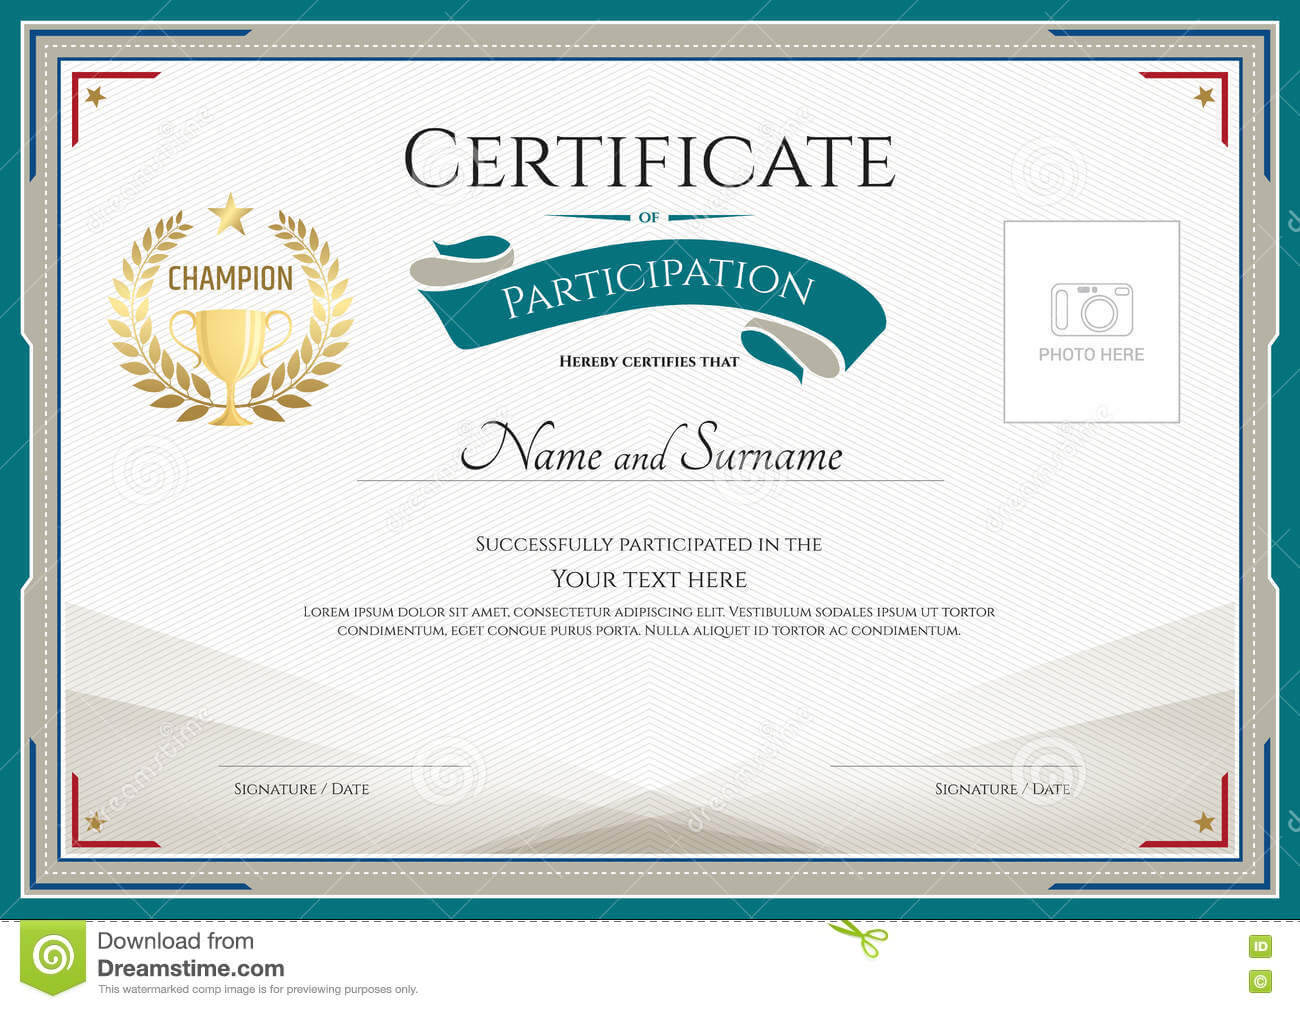 Certificate Of Participation Template With Green Broder Pertaining To Certification Of Participation Free Template